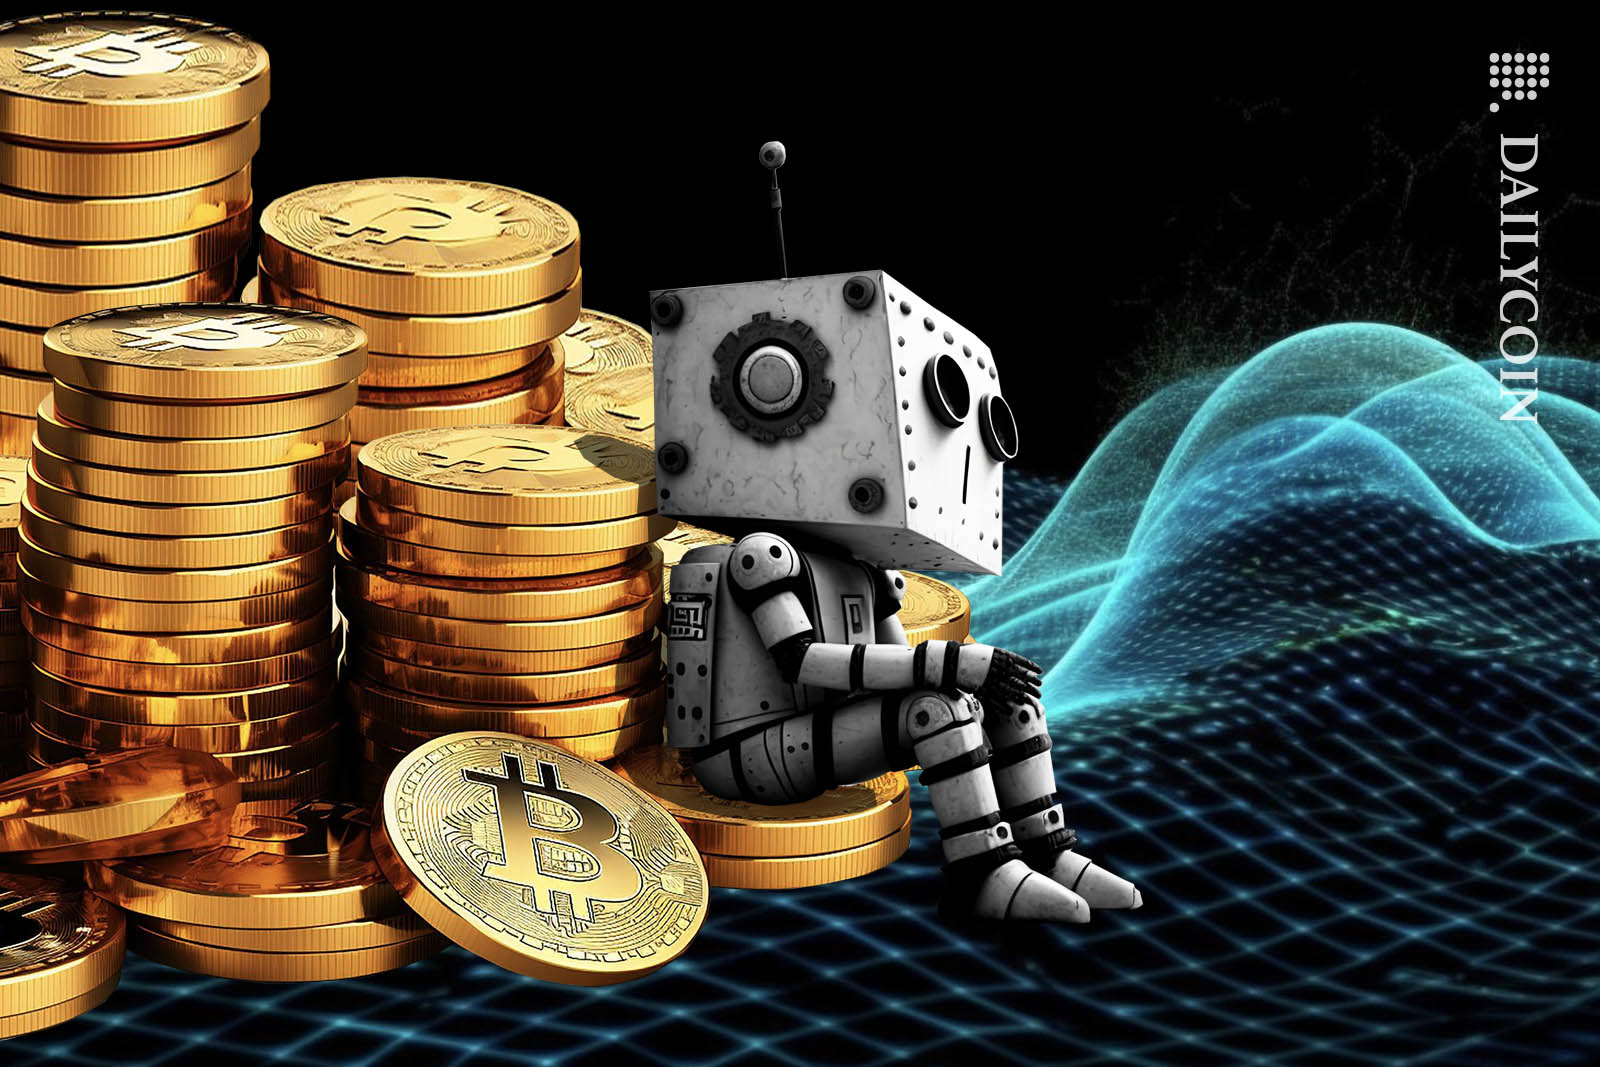 Little grayscale robot sitting on a big pile of bitcoins.